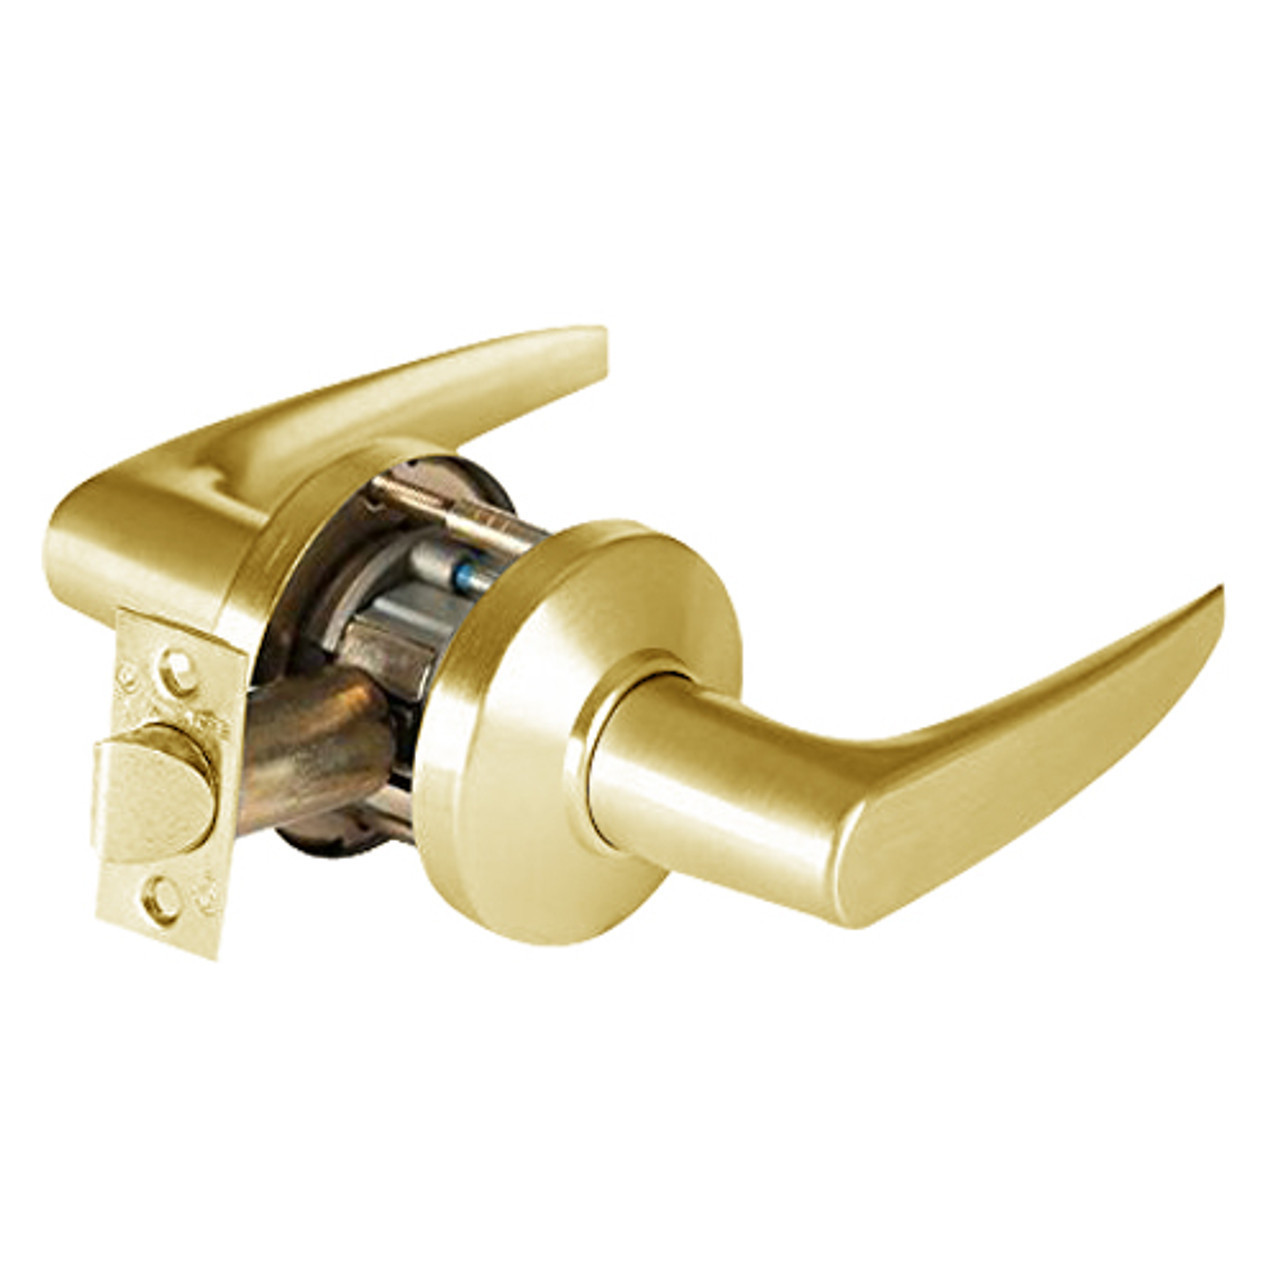 9K50N16CSTK605LM Best 9K Series Passage Heavy Duty Cylindrical Lever Locks with Curved Without Return Lever Design in Bright Brass